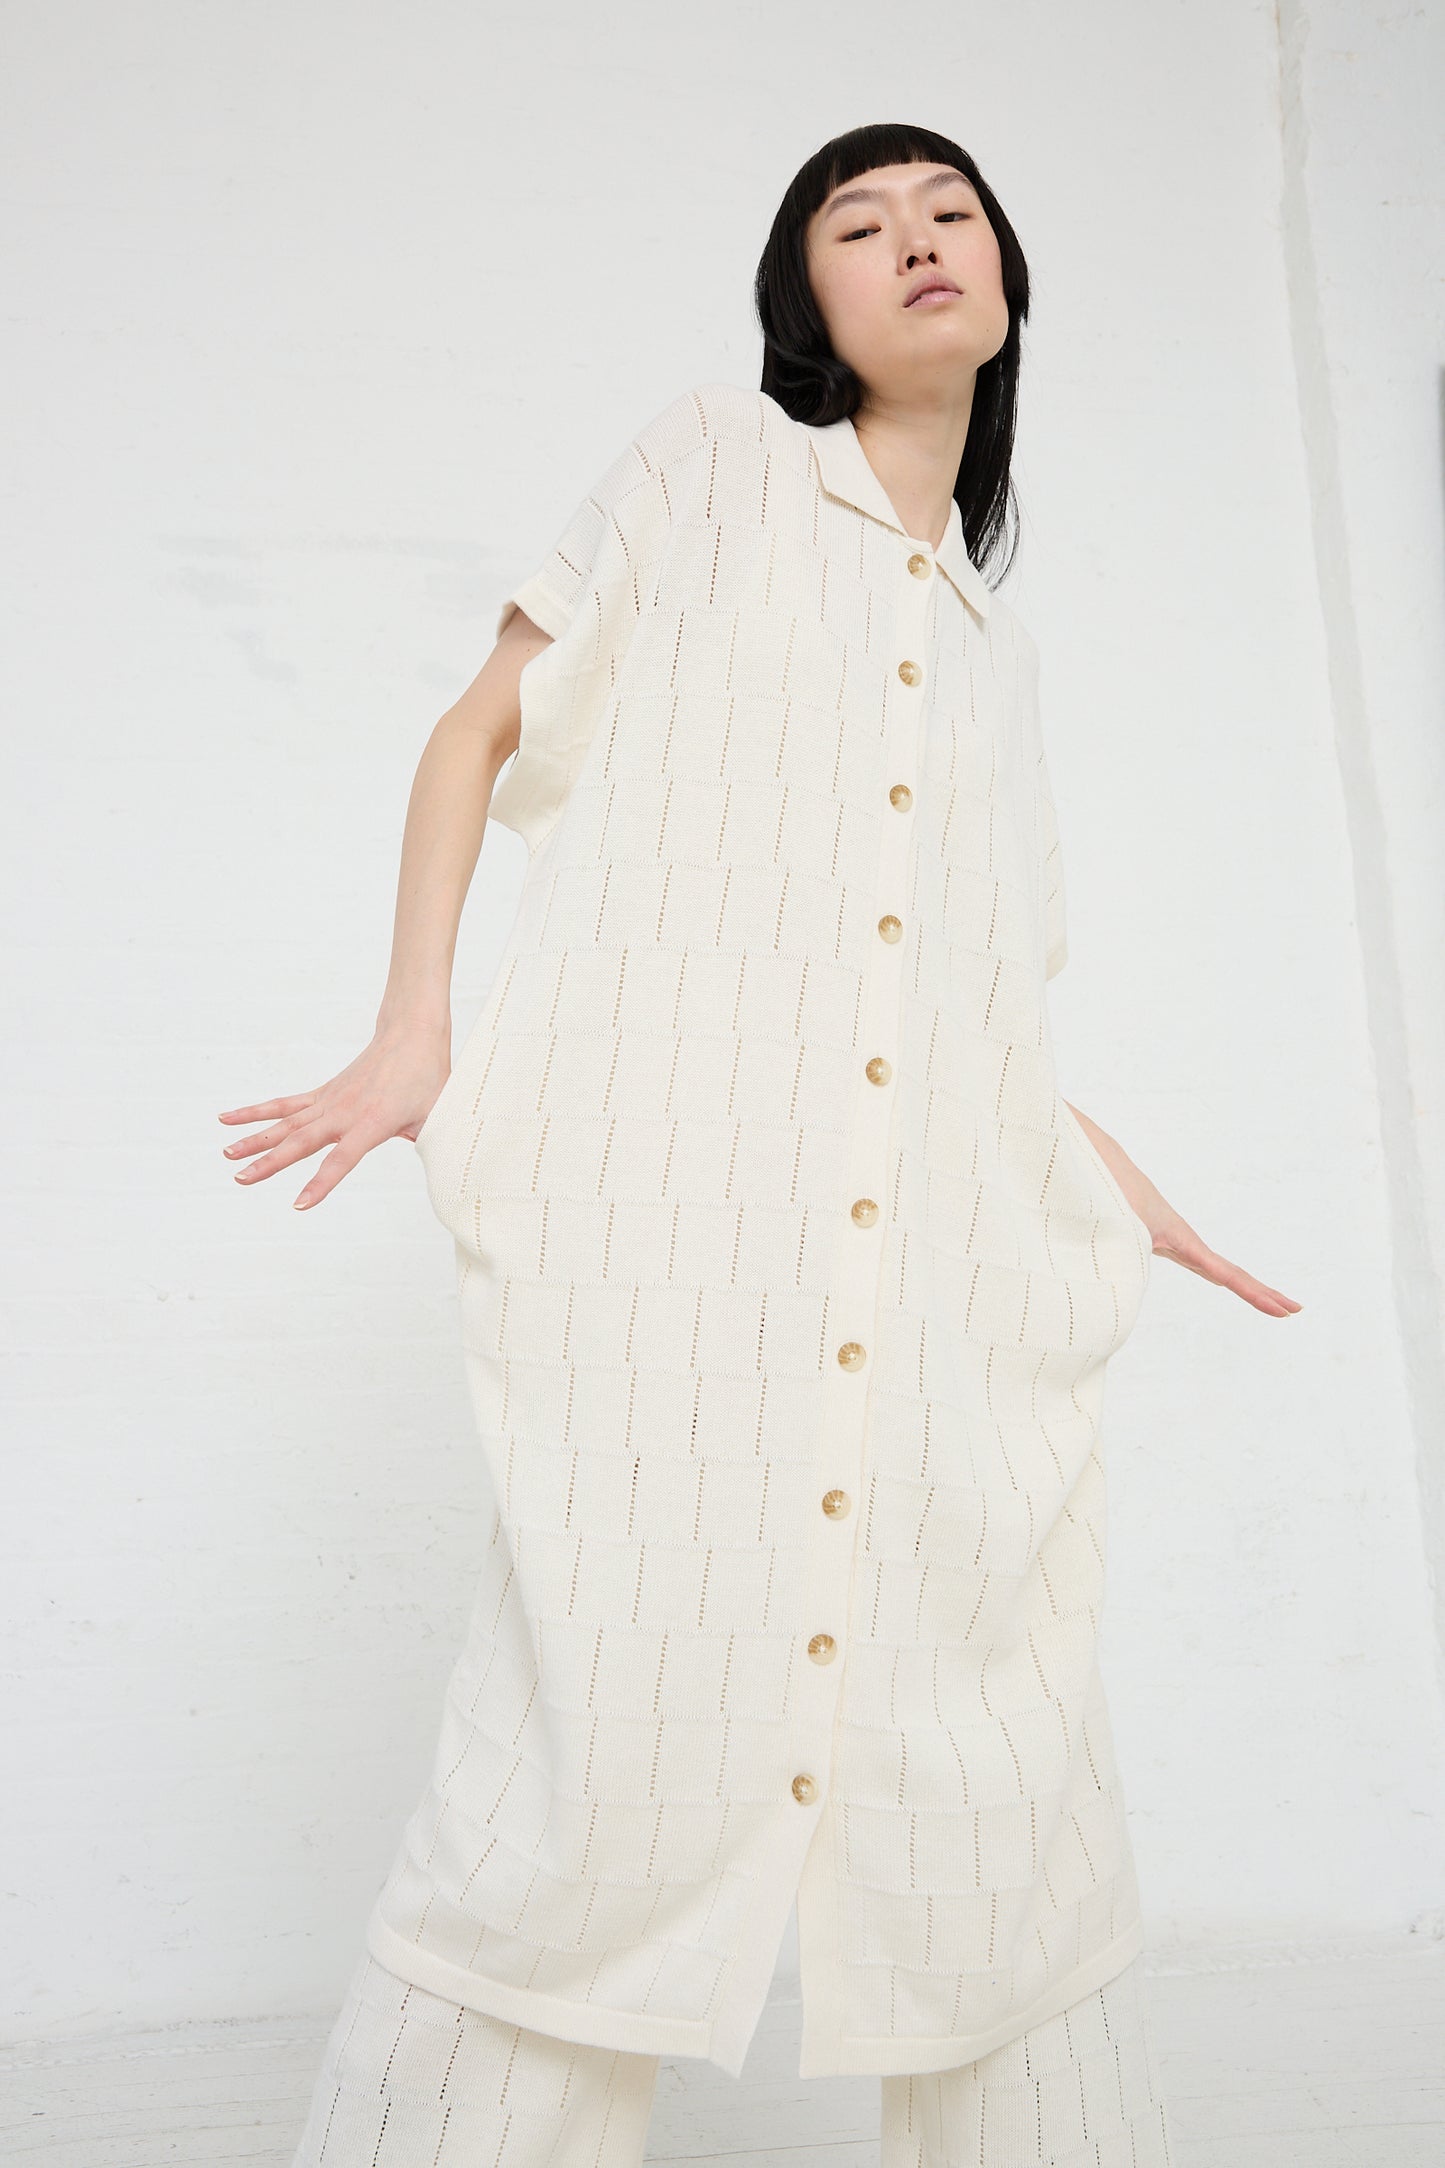 Woman posing in a Lattice Shirt Dress in Bone by Lauren Manoogian against a white background.